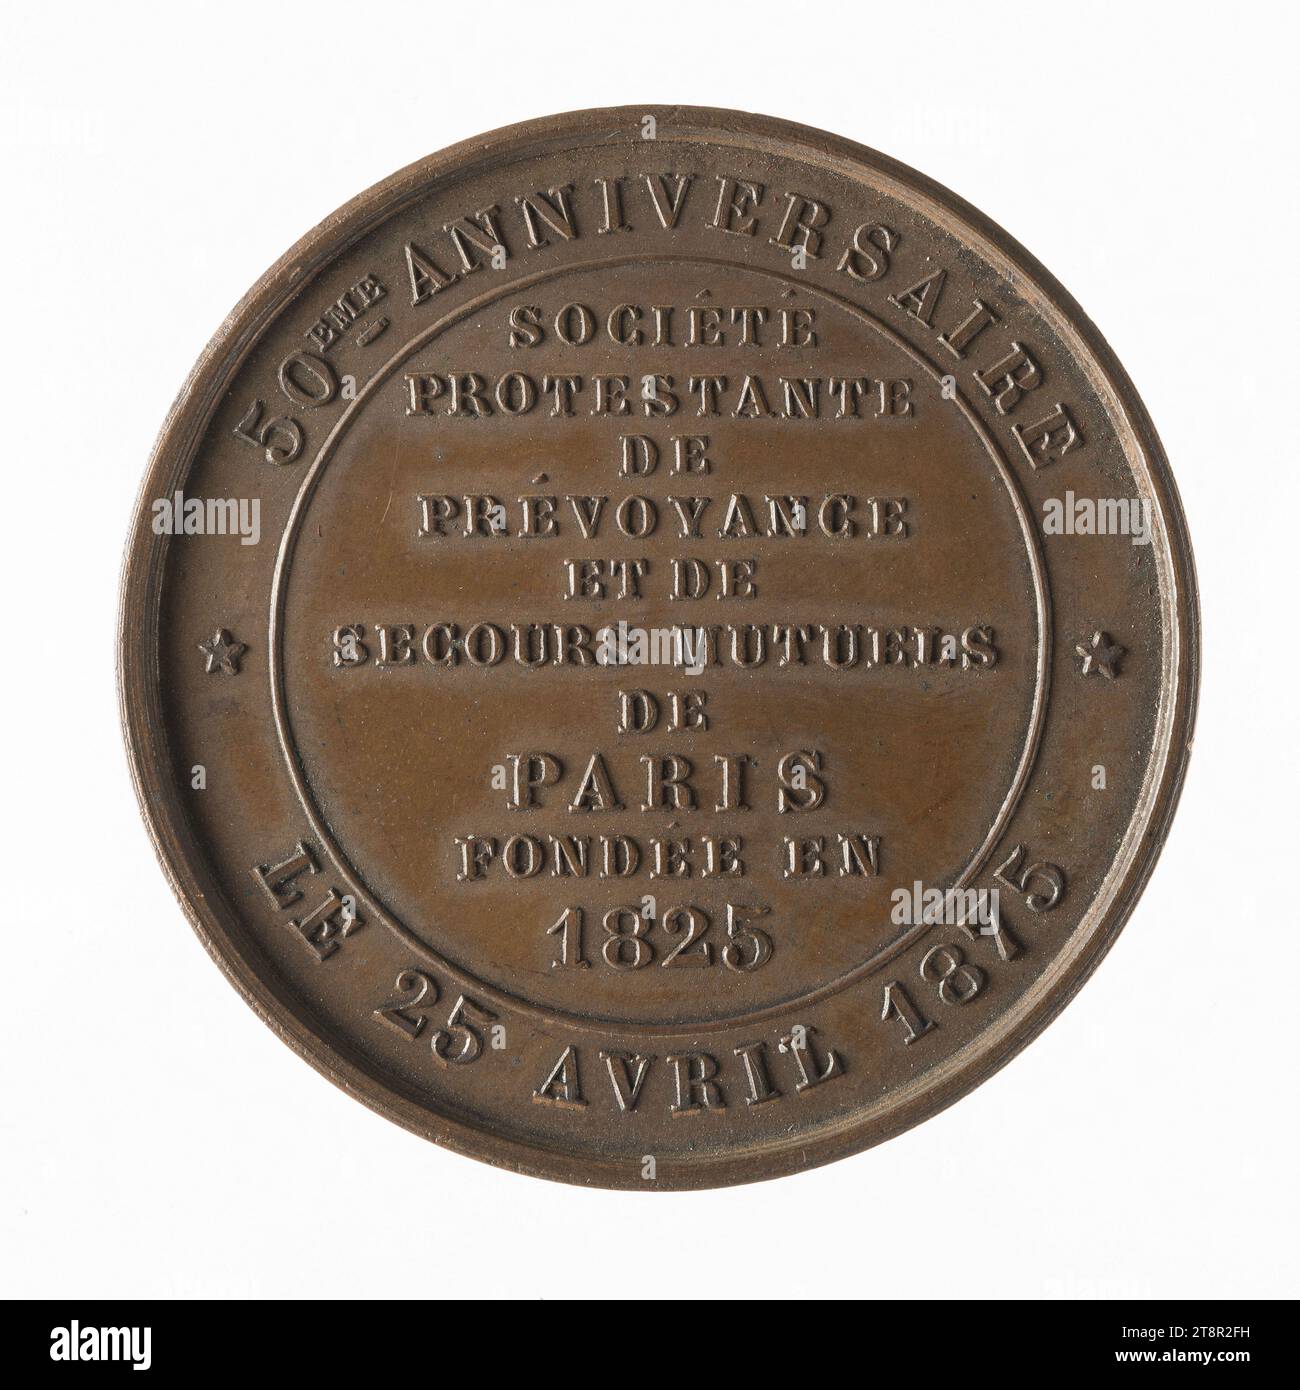 Celebration of the 50th anniversary of the Protestant Society of Providence and Mutual Aid of Paris, 1825, In 1825, Numismatic, Token (numismatic), Copper, Dimensions - Work: Diameter: 3.6 cm, Weight (type dimension): 19.95 g Stock Photo